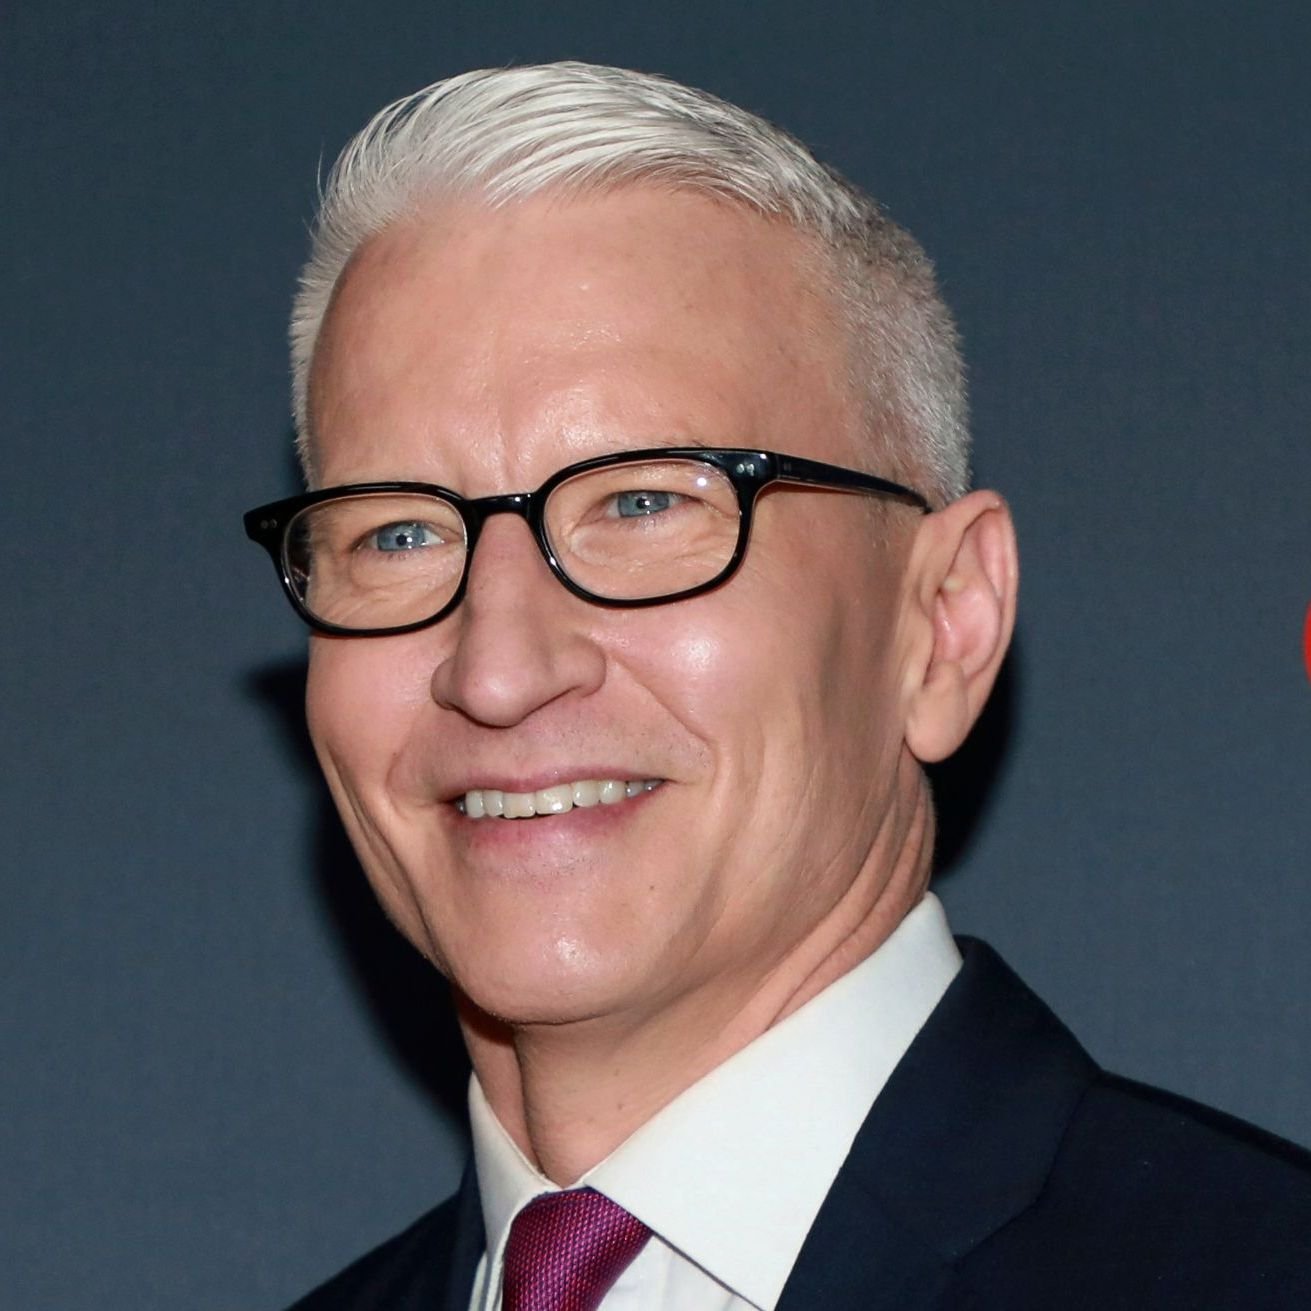 Anderson cooper journalist and american broadcaster